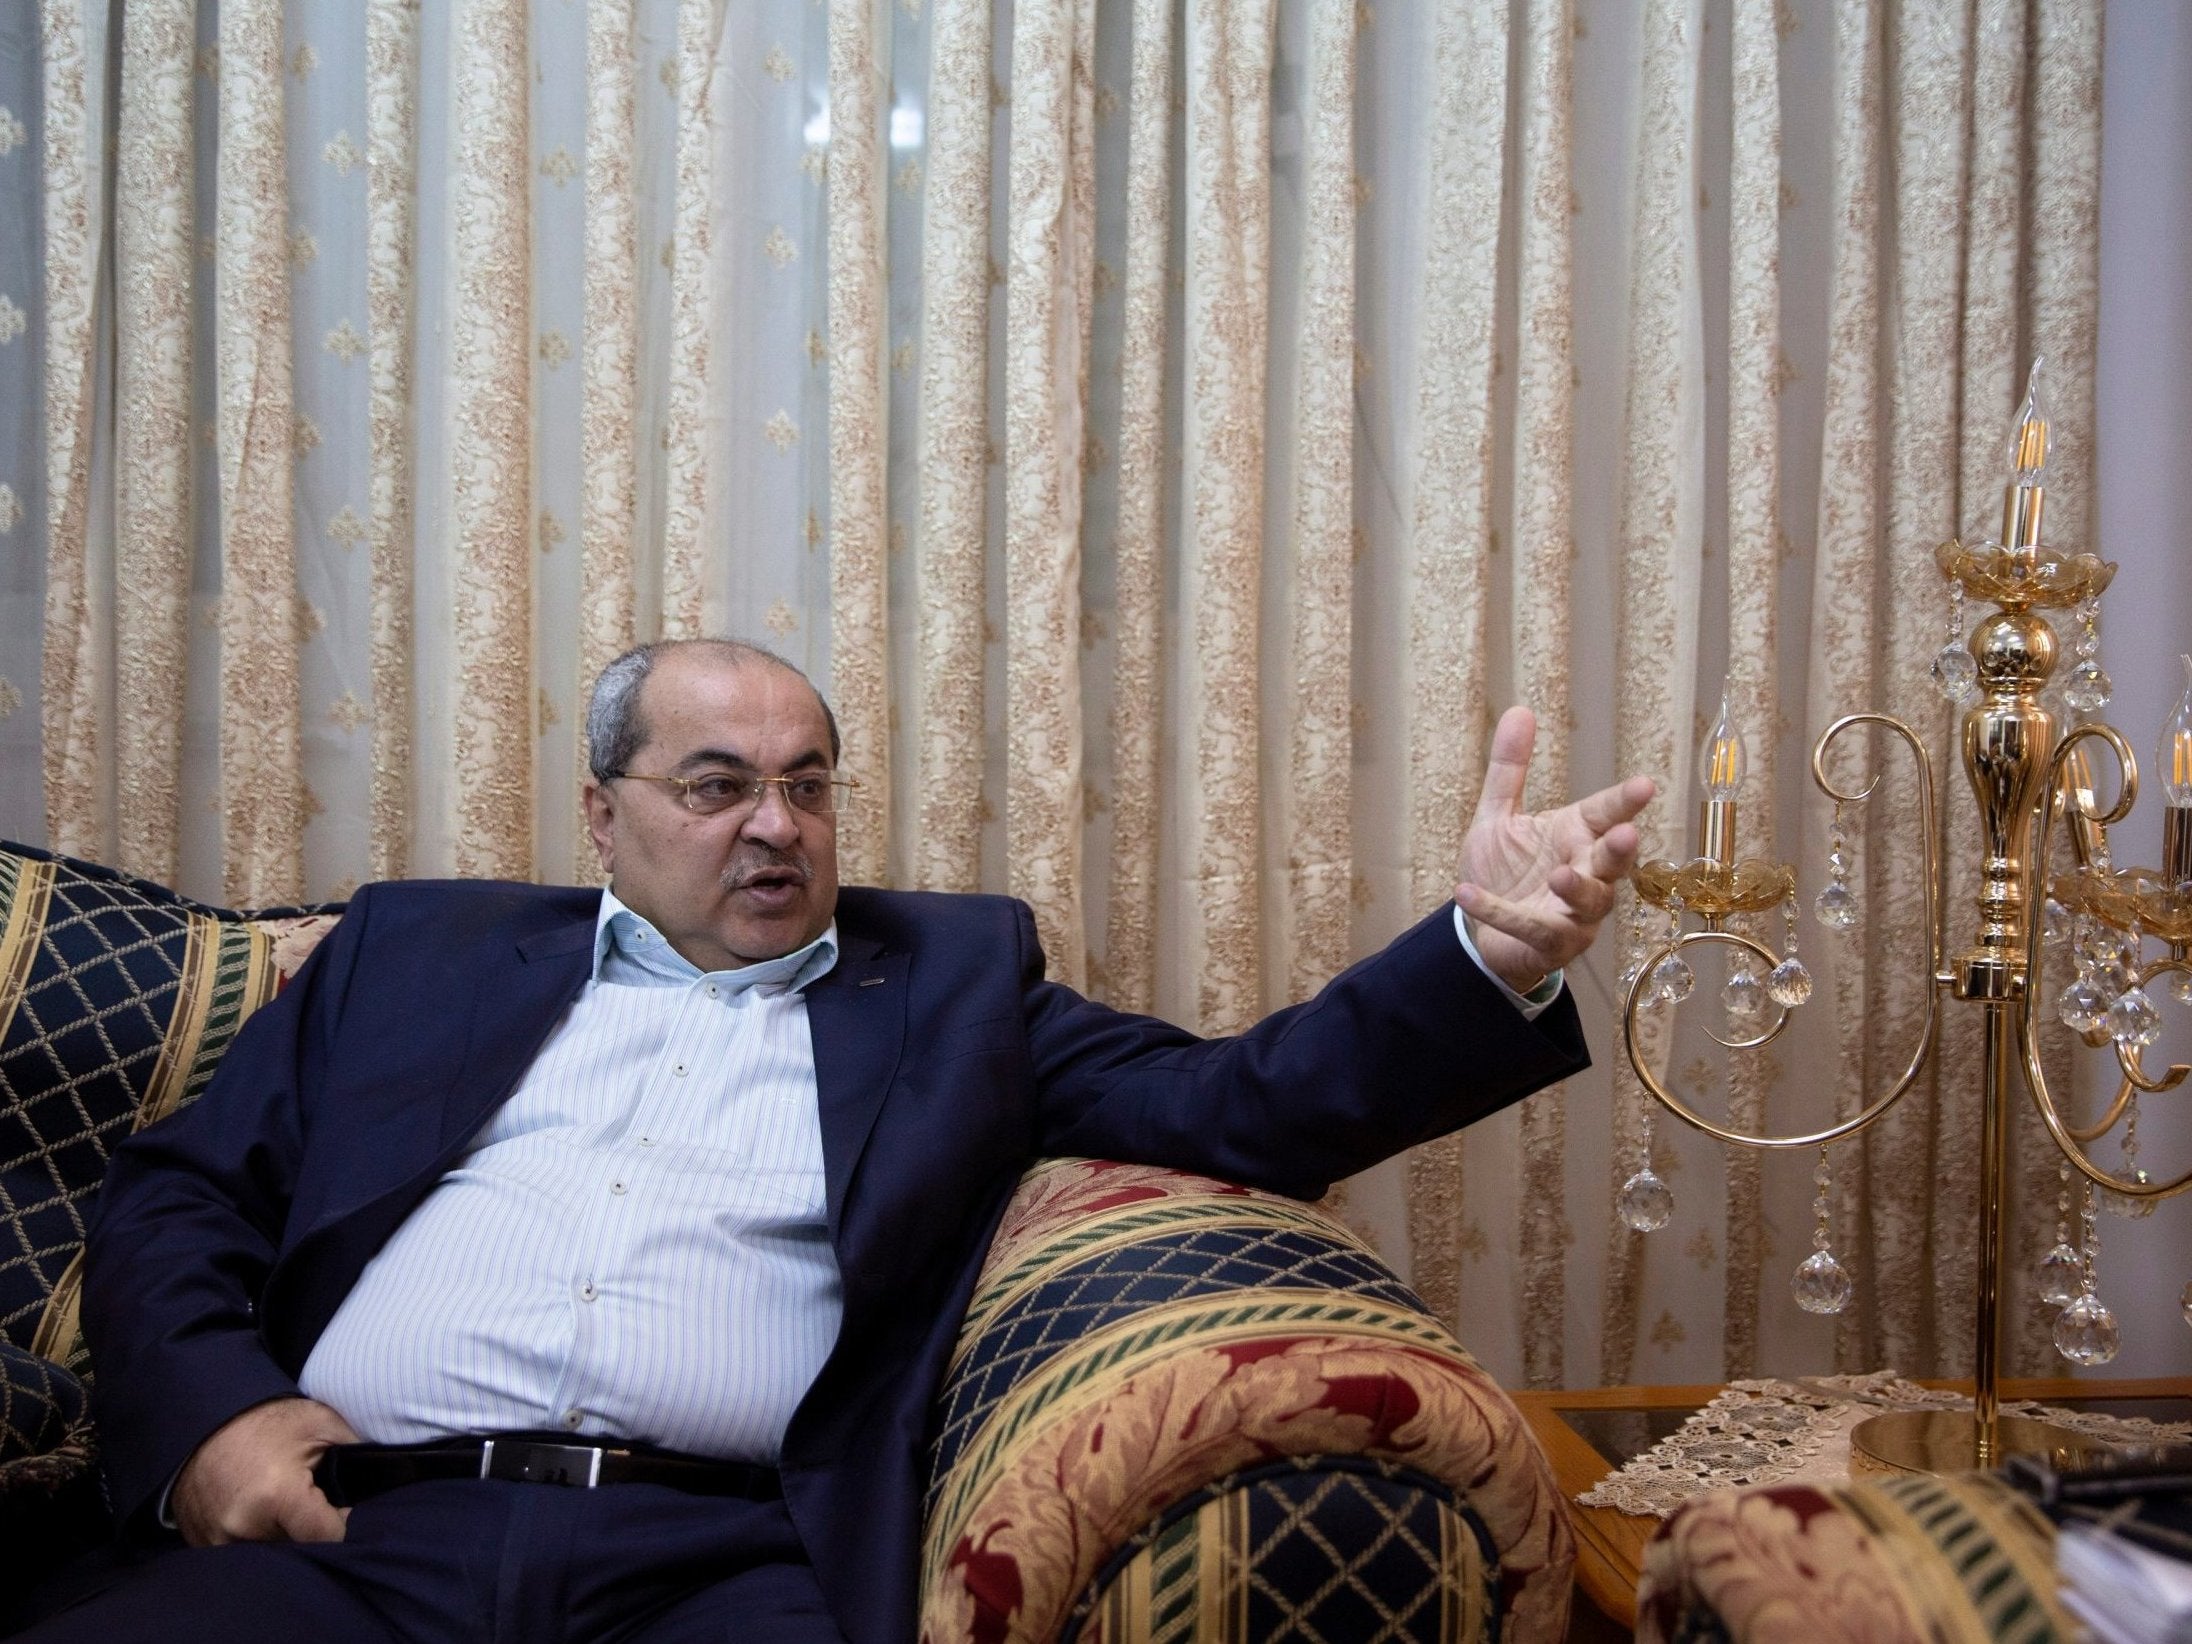 Ahmad Tibi speaks with AP at his home in Jerusalem, 6 March 2019: "It's possible Benjamin Netanyahu is leading us toward a binational state, and then it will either be an apartheid state in which only the Jews can vote, or a democratic country in which there is one person, one vote. If that happens, tomorrow I will run against Bibi. Then it will really be Bibi or Tibi."